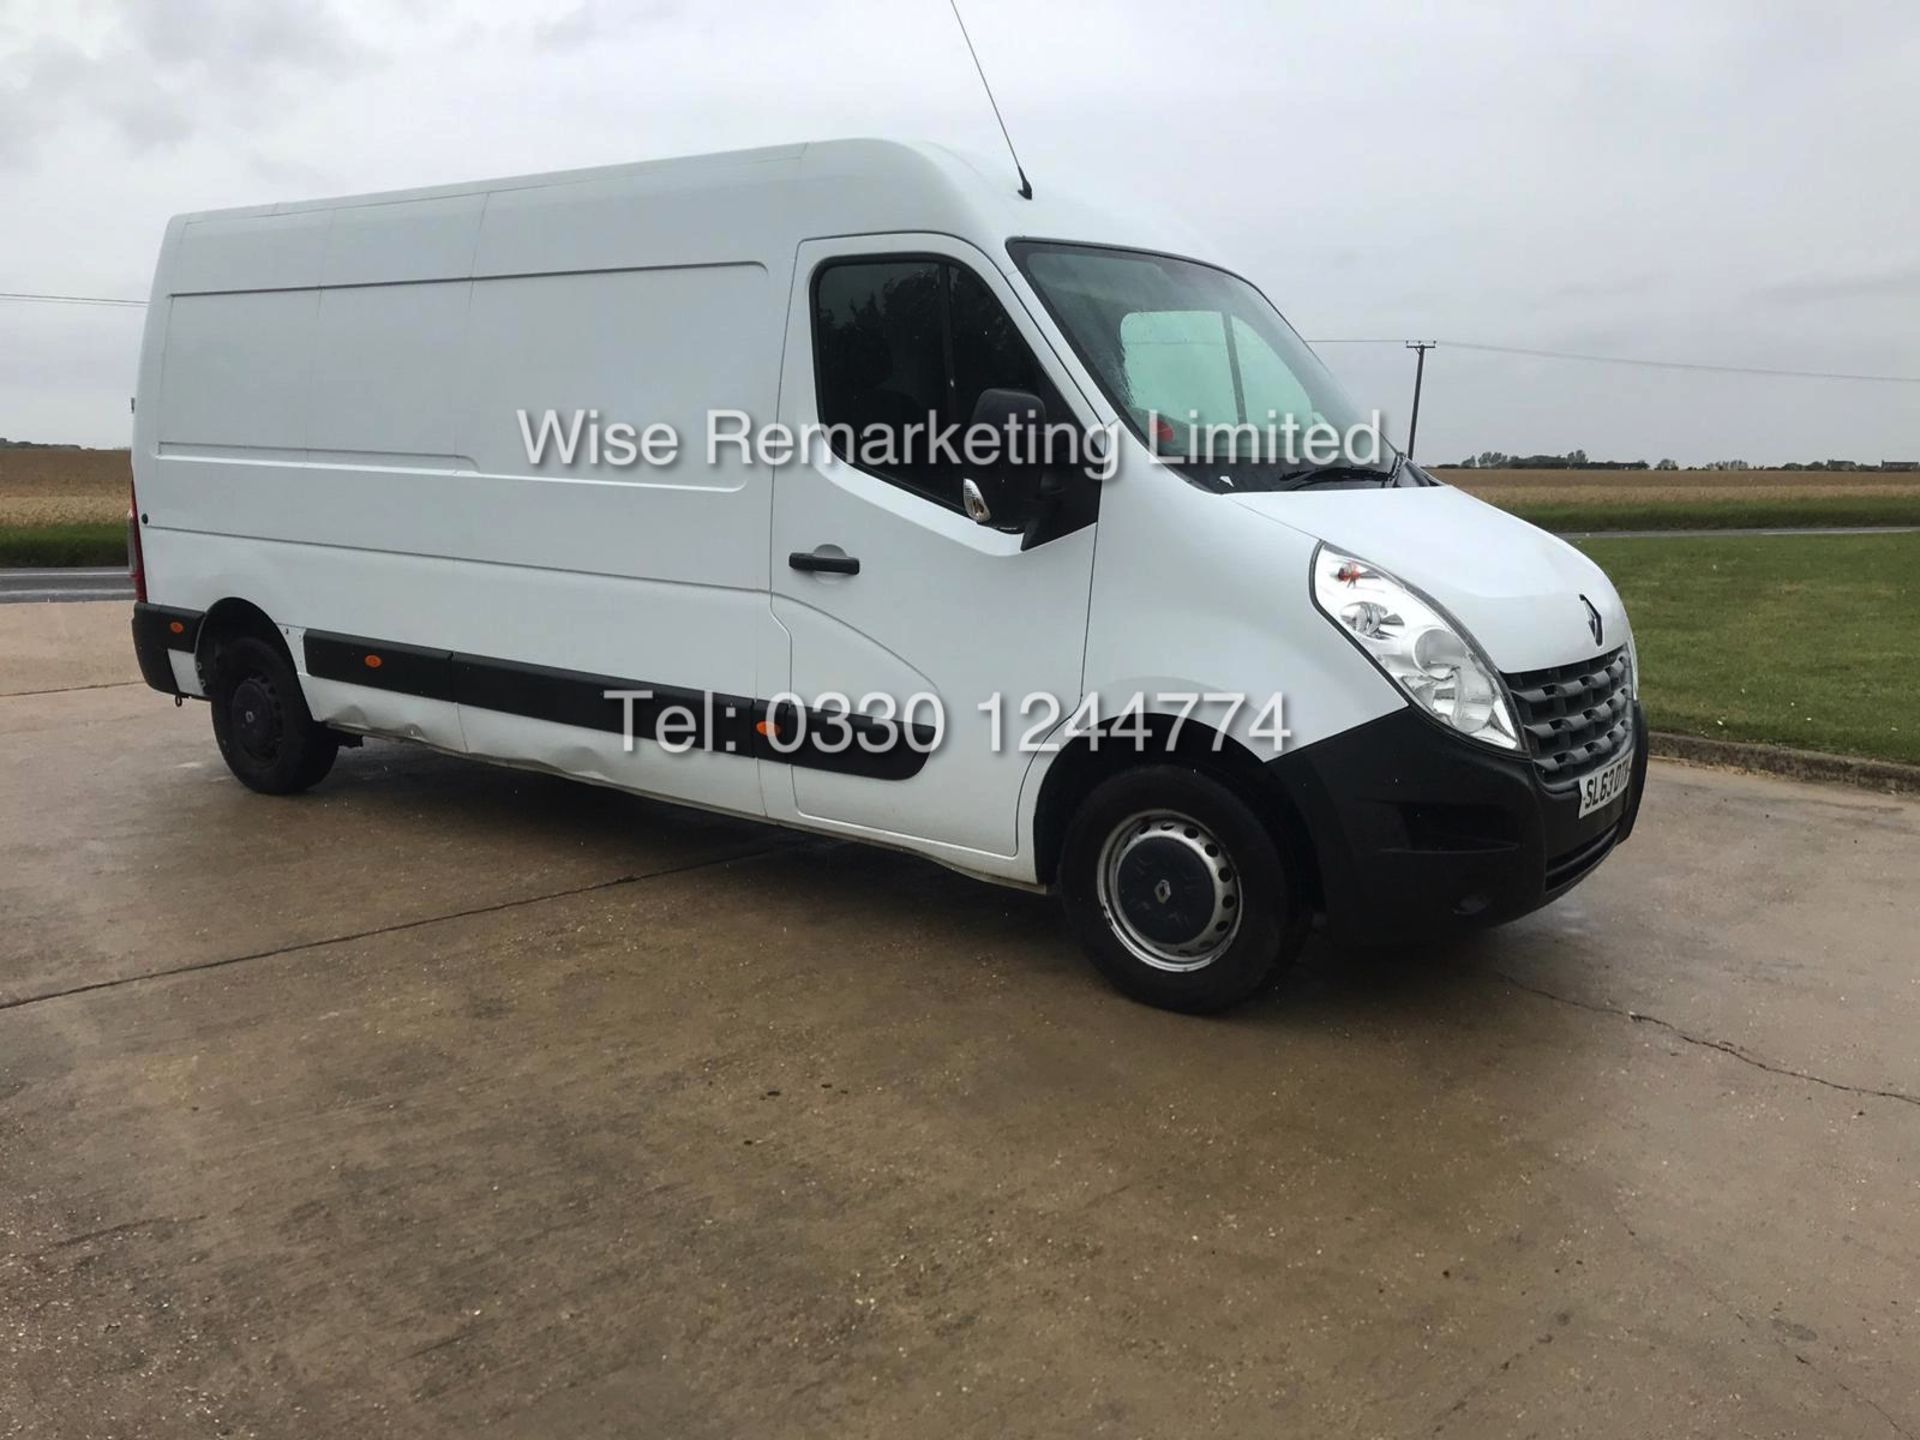 **RESERVE MET** RENAULT MASTER LM35 2.3 DCI 125 (2014) LWB 3500KG - 1 OWNER FROM NEW - AIR CON